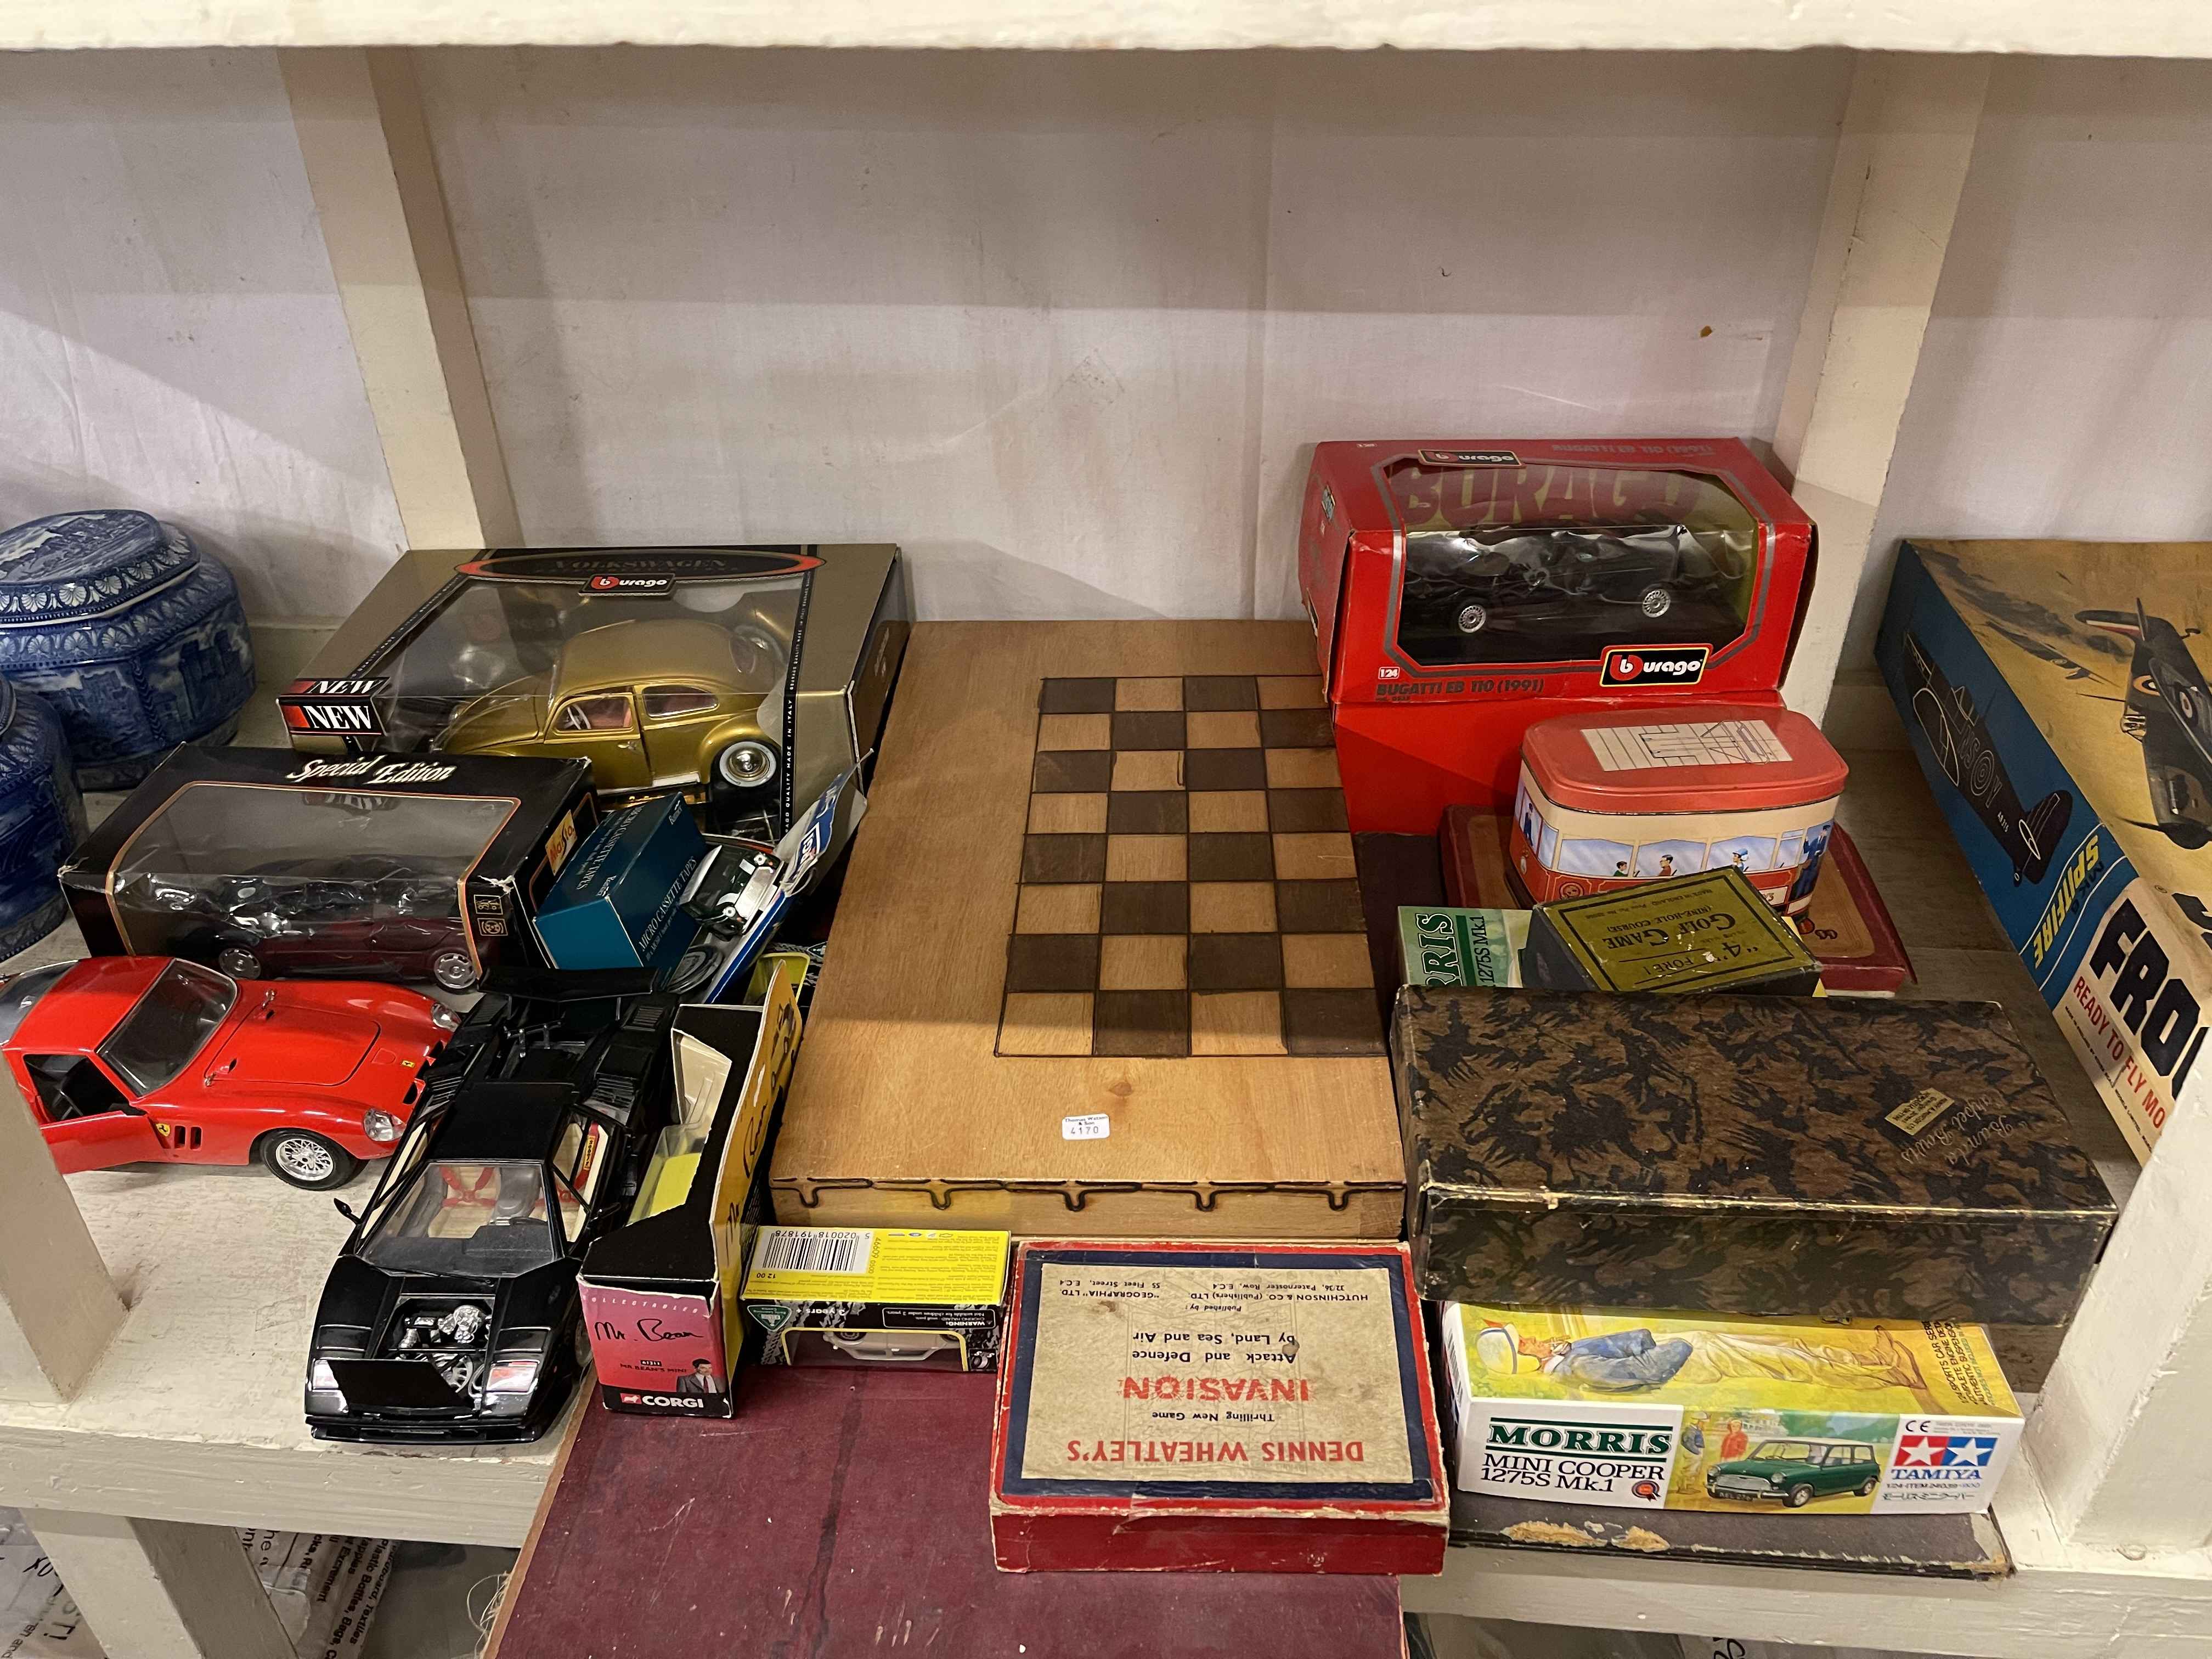 Collection of Meccano, Frog MK6 Spitfire, Hornby, diecast vehicles, etc. - Image 3 of 3